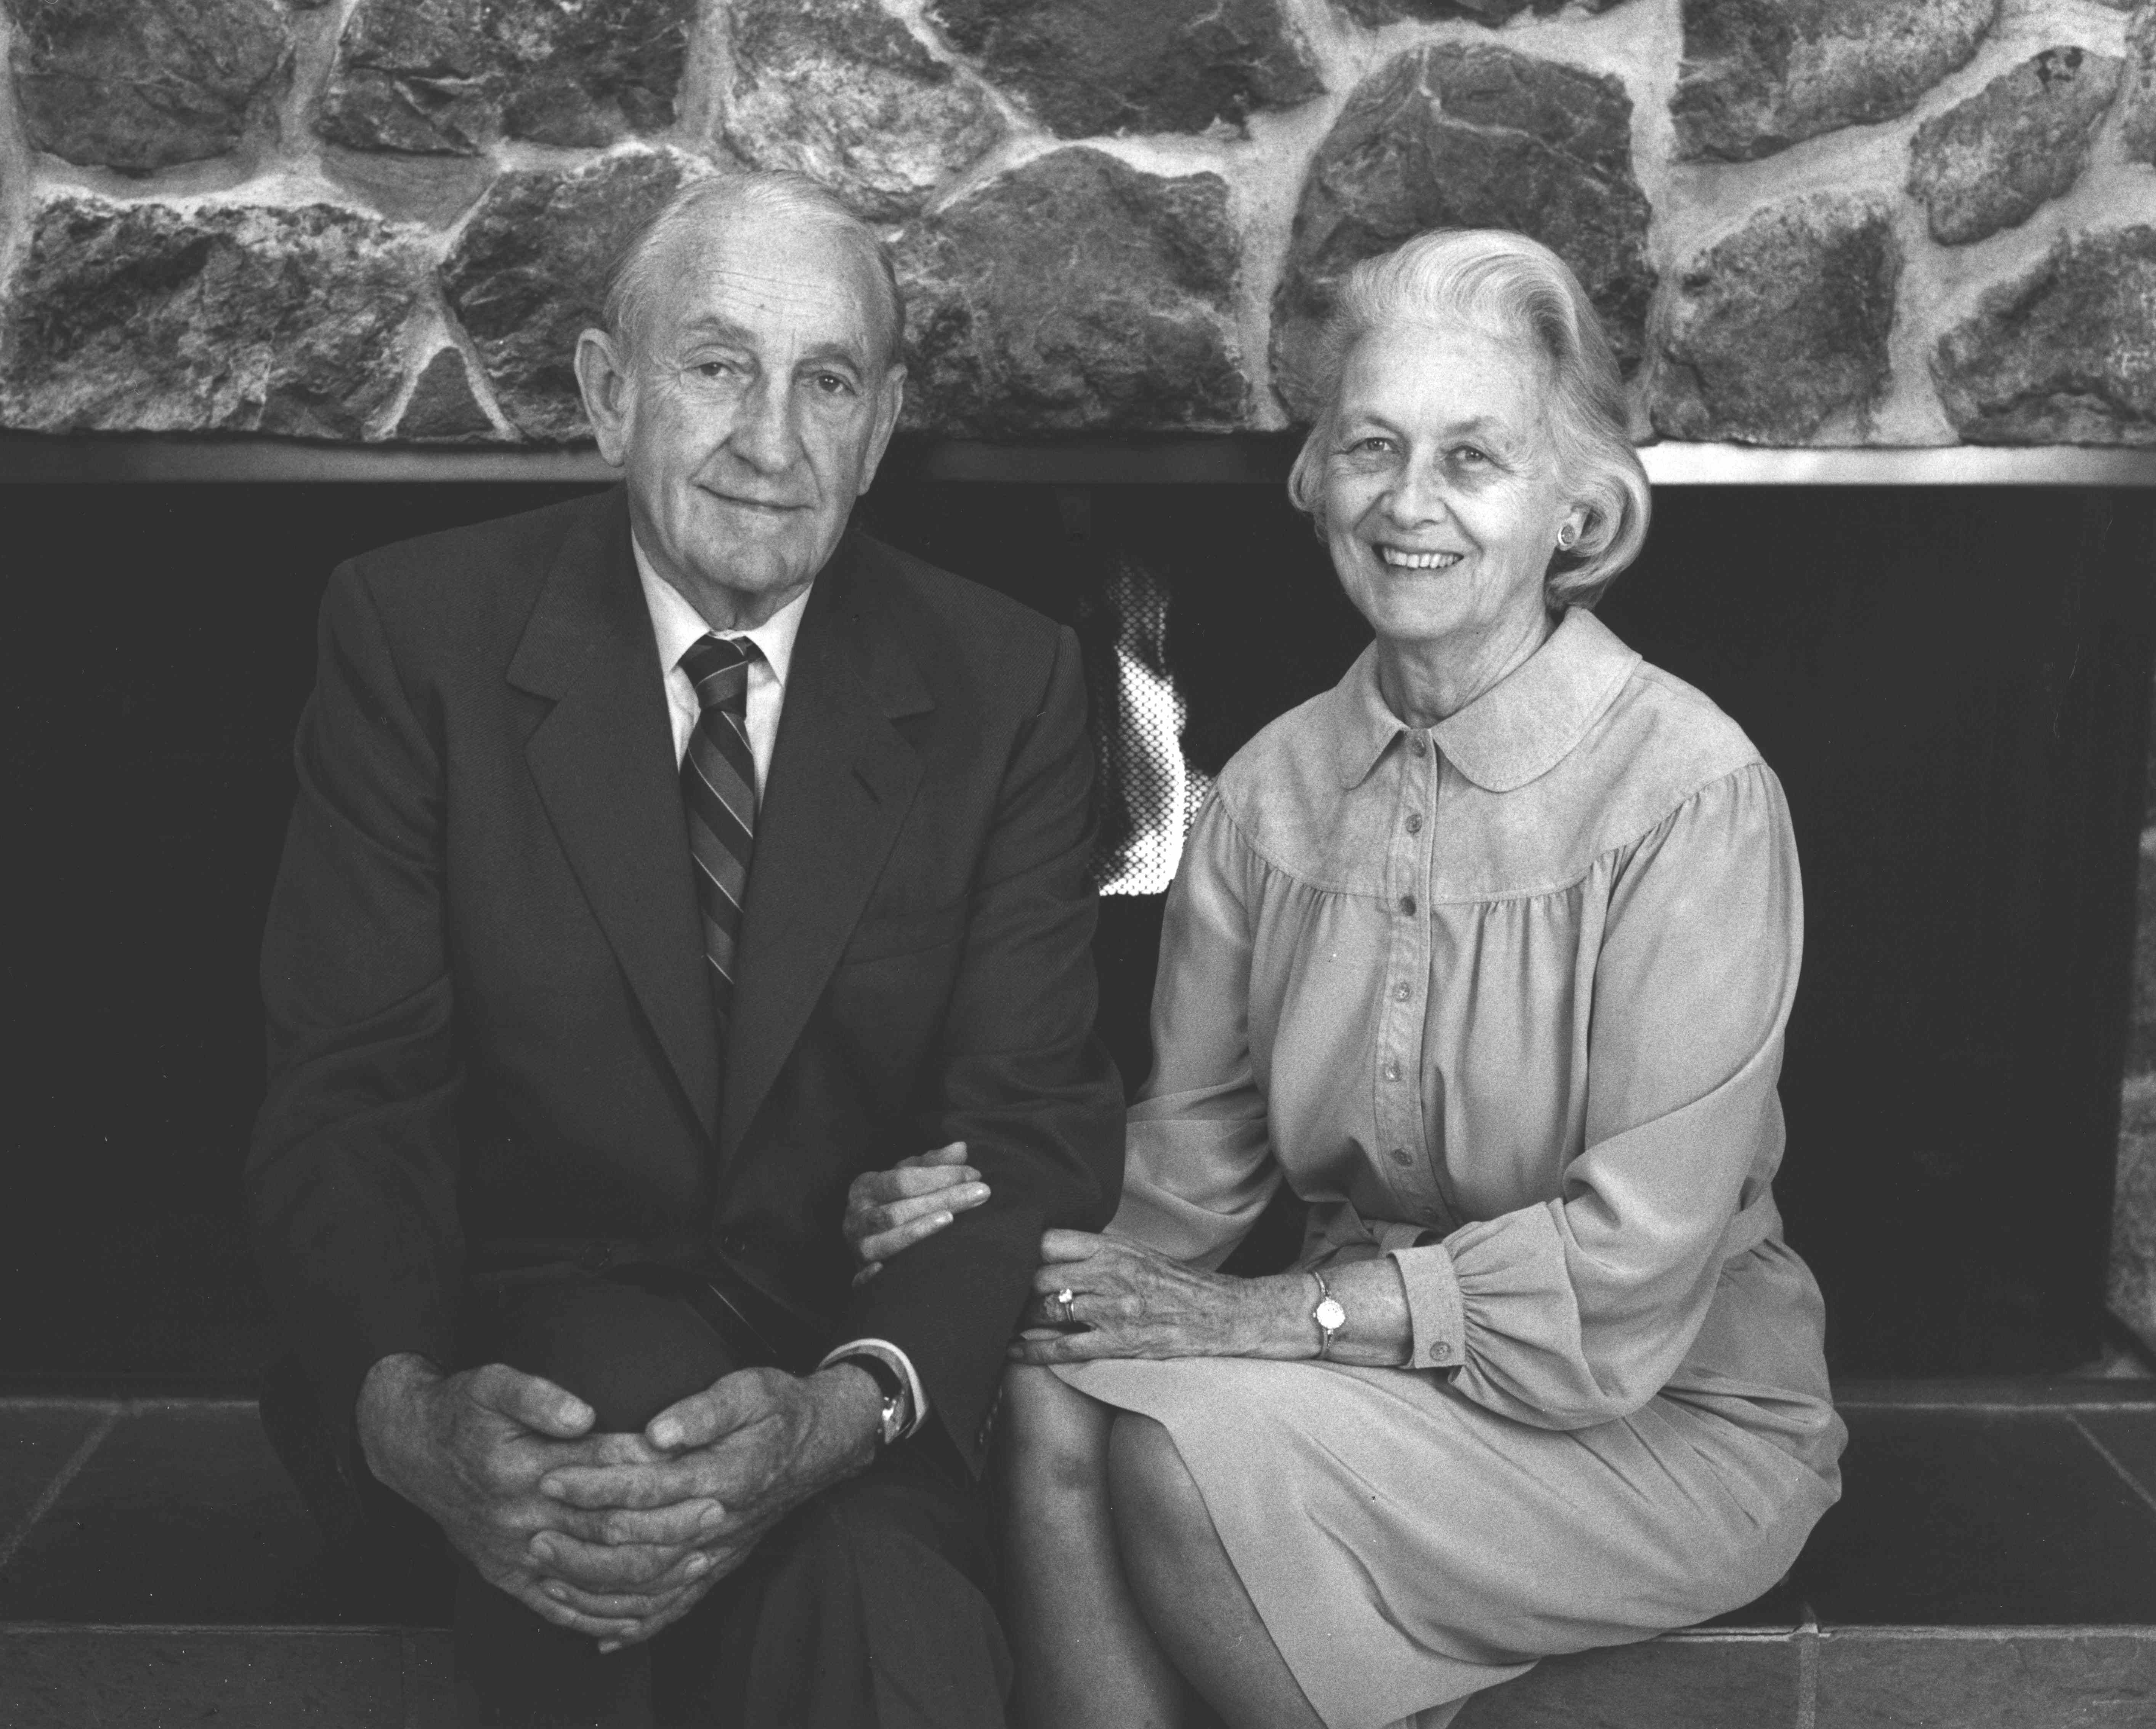 David and Lucile Packard sit together in front of a fireplace.